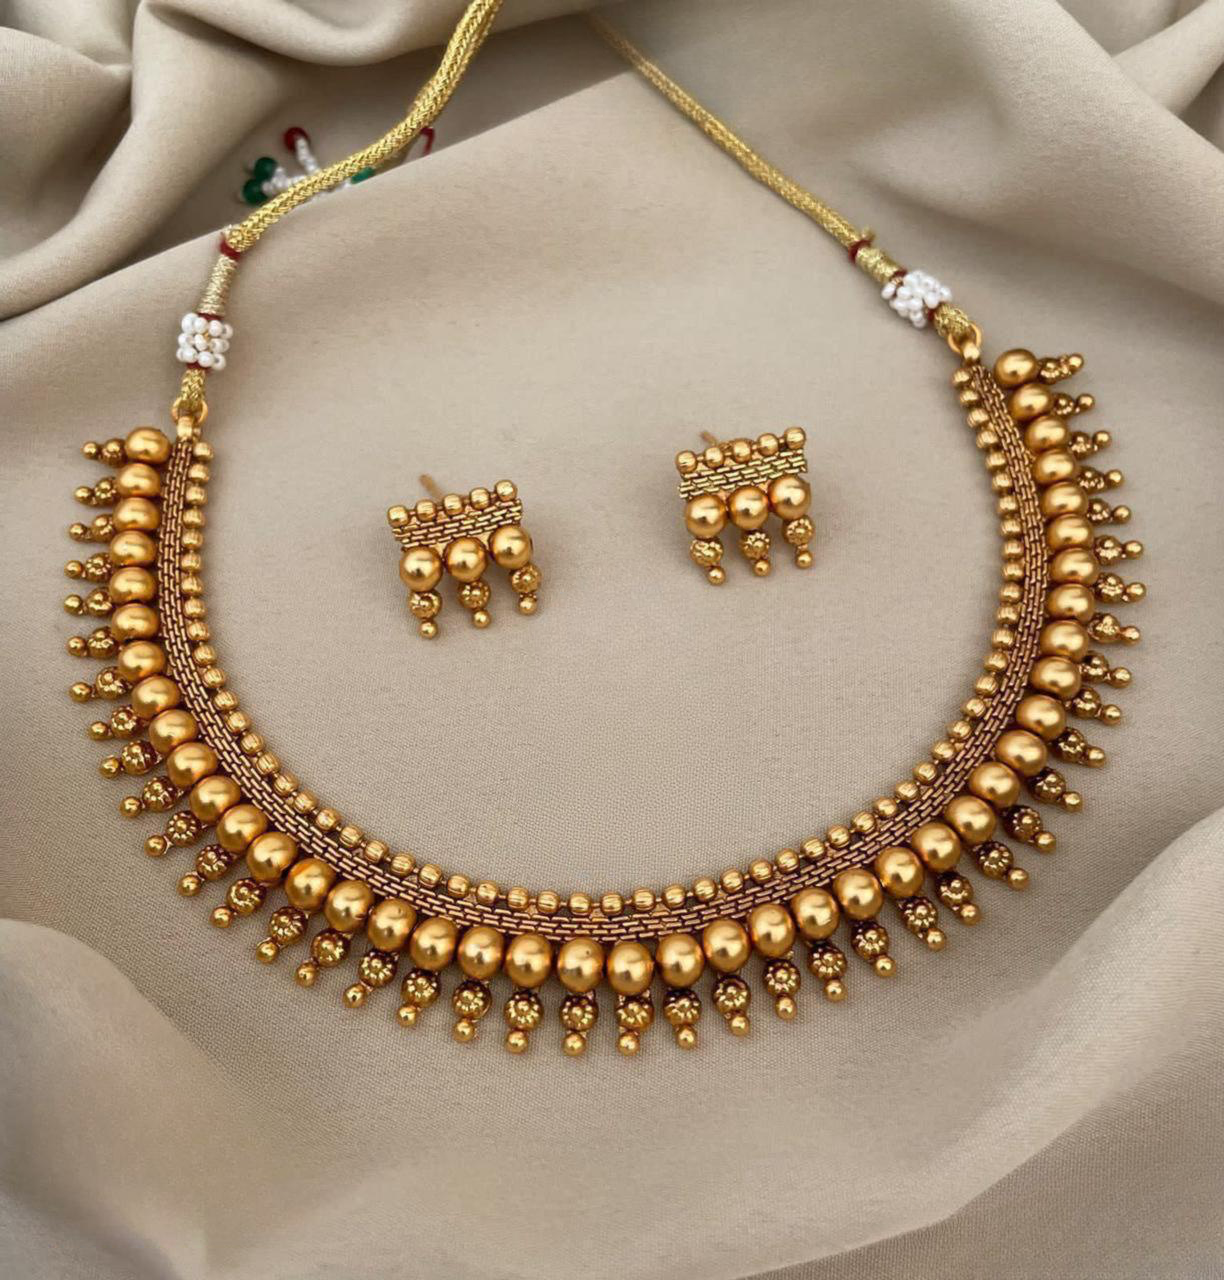 Bestselling Simple South Style Necklace Set with Stud Earrings